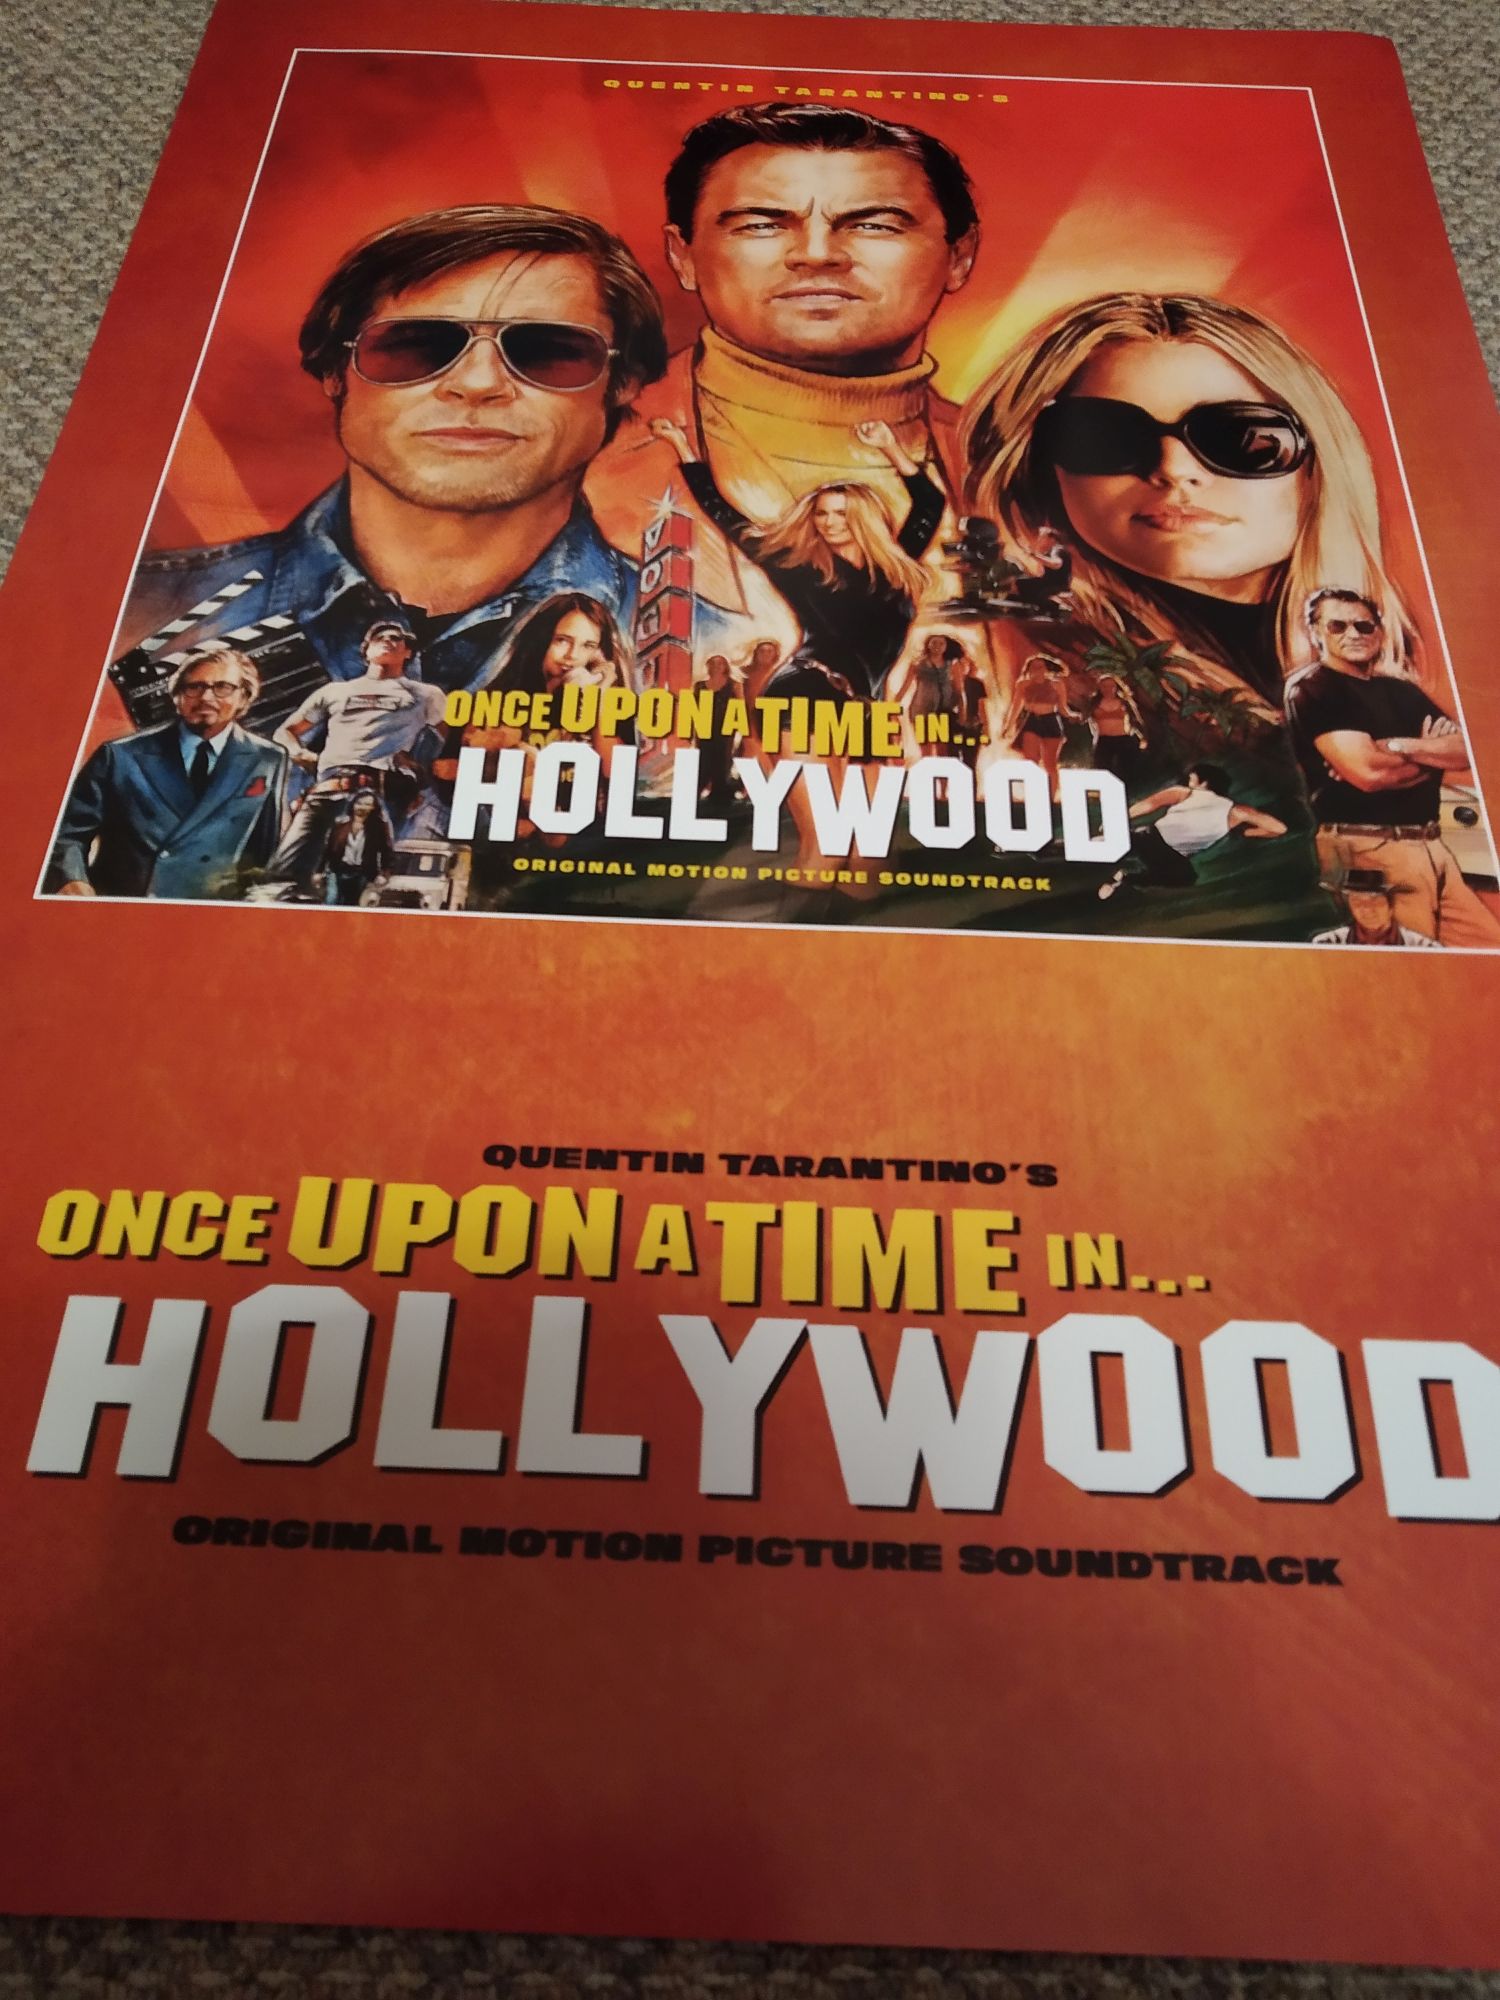 Quentin Tarantino - Once Upon A Time In.. Hollywood - POSTER